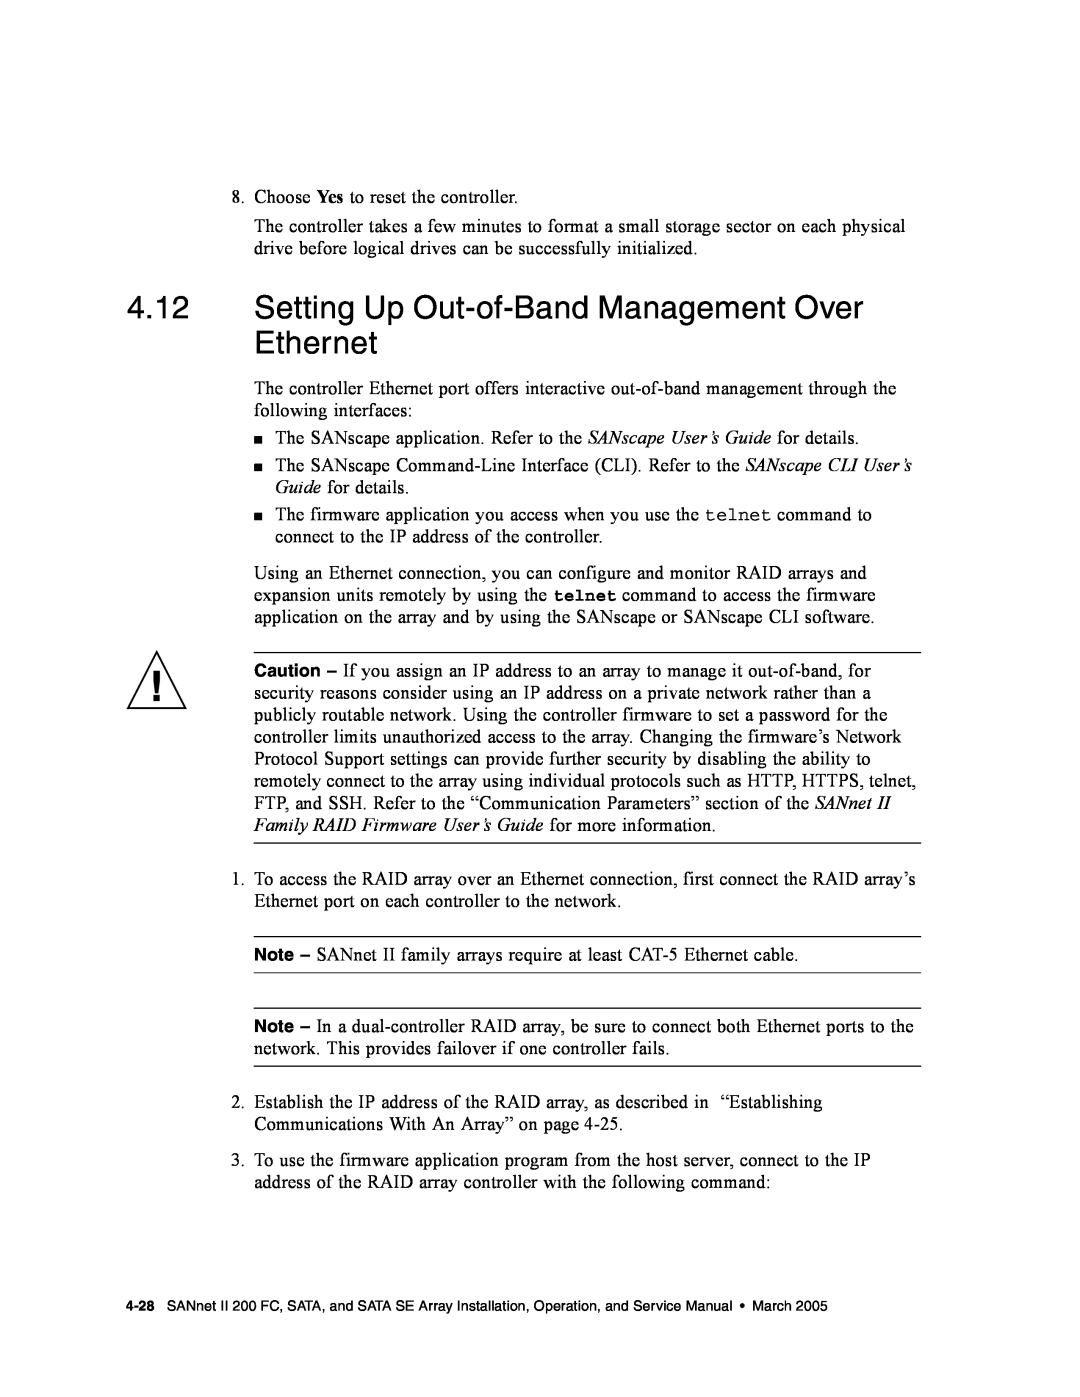 Dot Hill Systems II 200 FC service manual Setting Up Out-of-Band Management Over Ethernet 